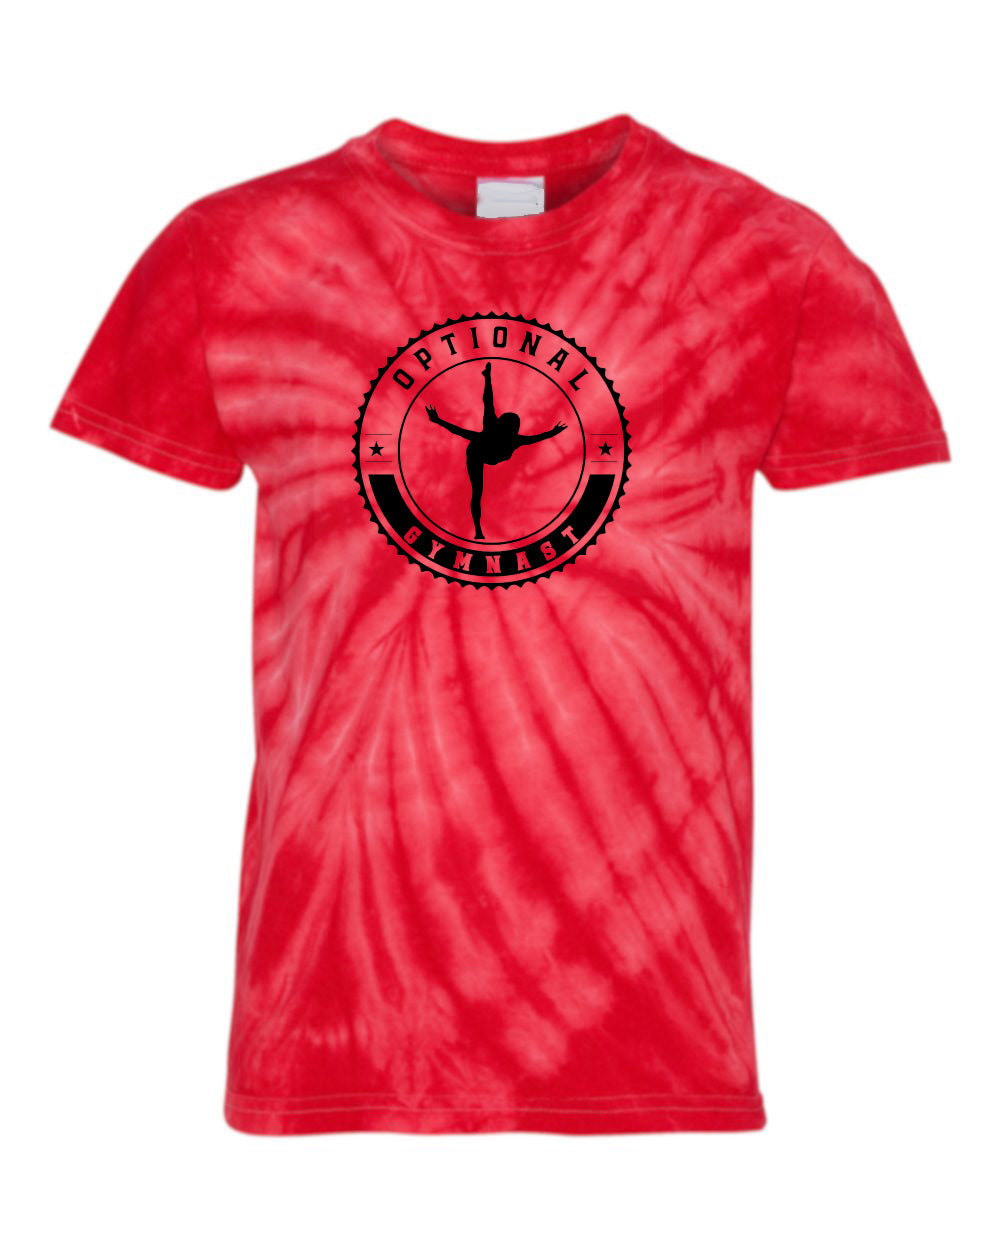 Optional Gymnast Youth Tie Dye T-Shirt Red